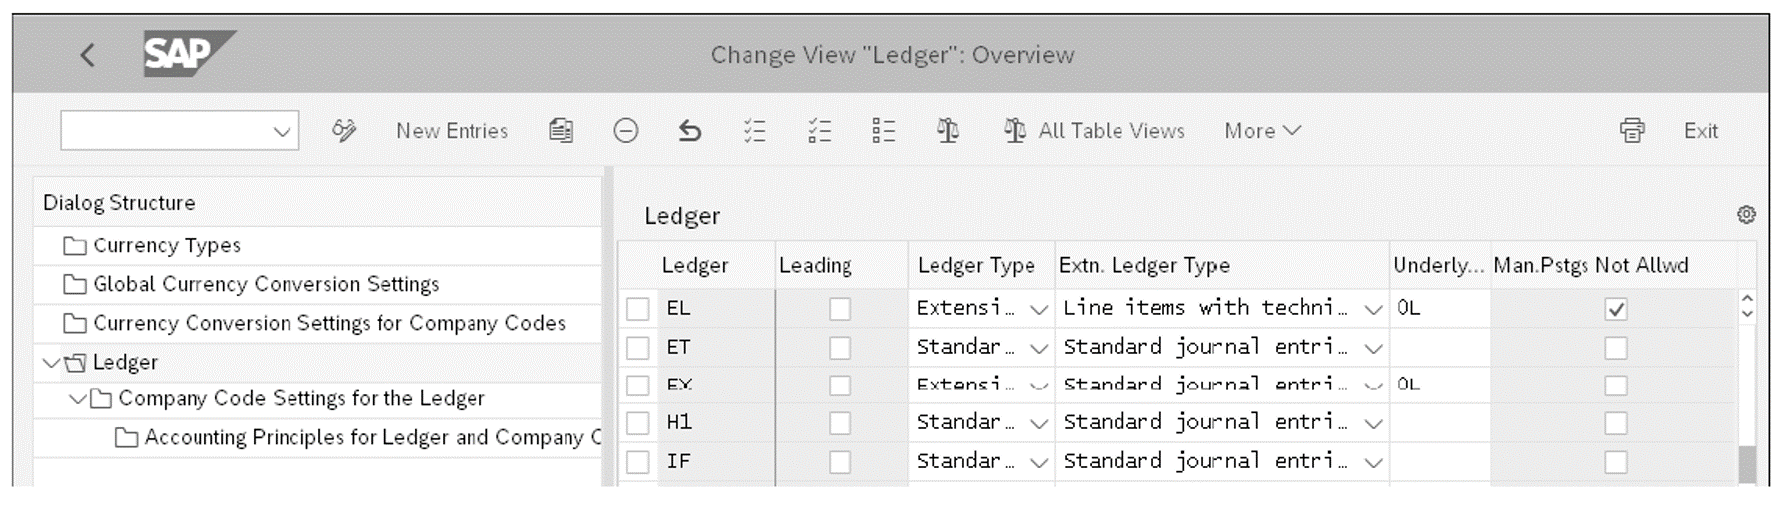 Creating the Extension Ledger